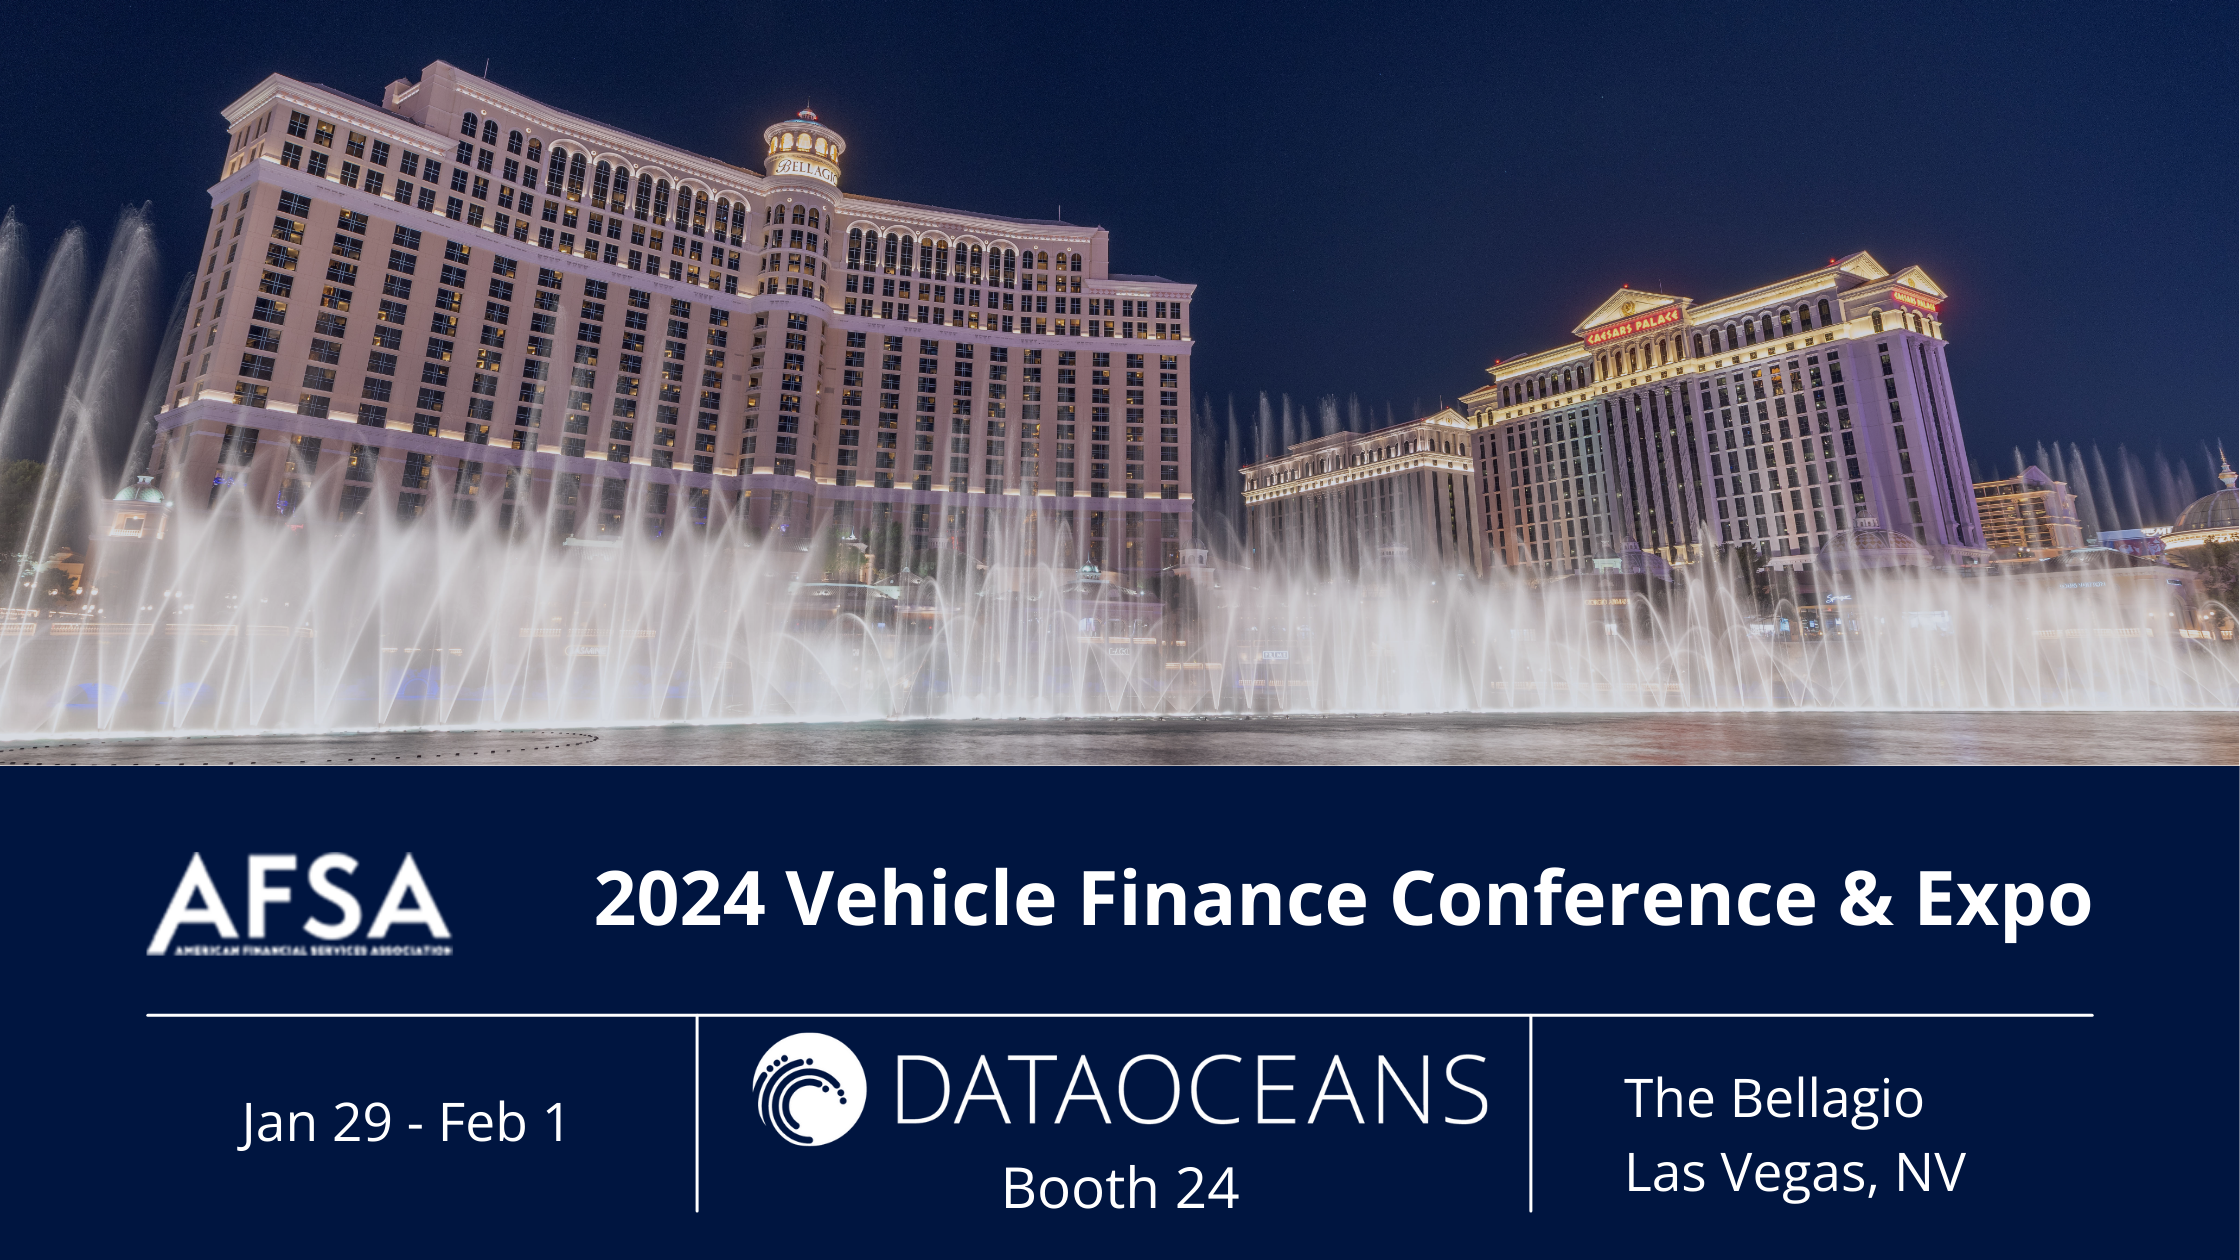 DataOceans to Exhibit at the 2024 vehicle finance conference and expo